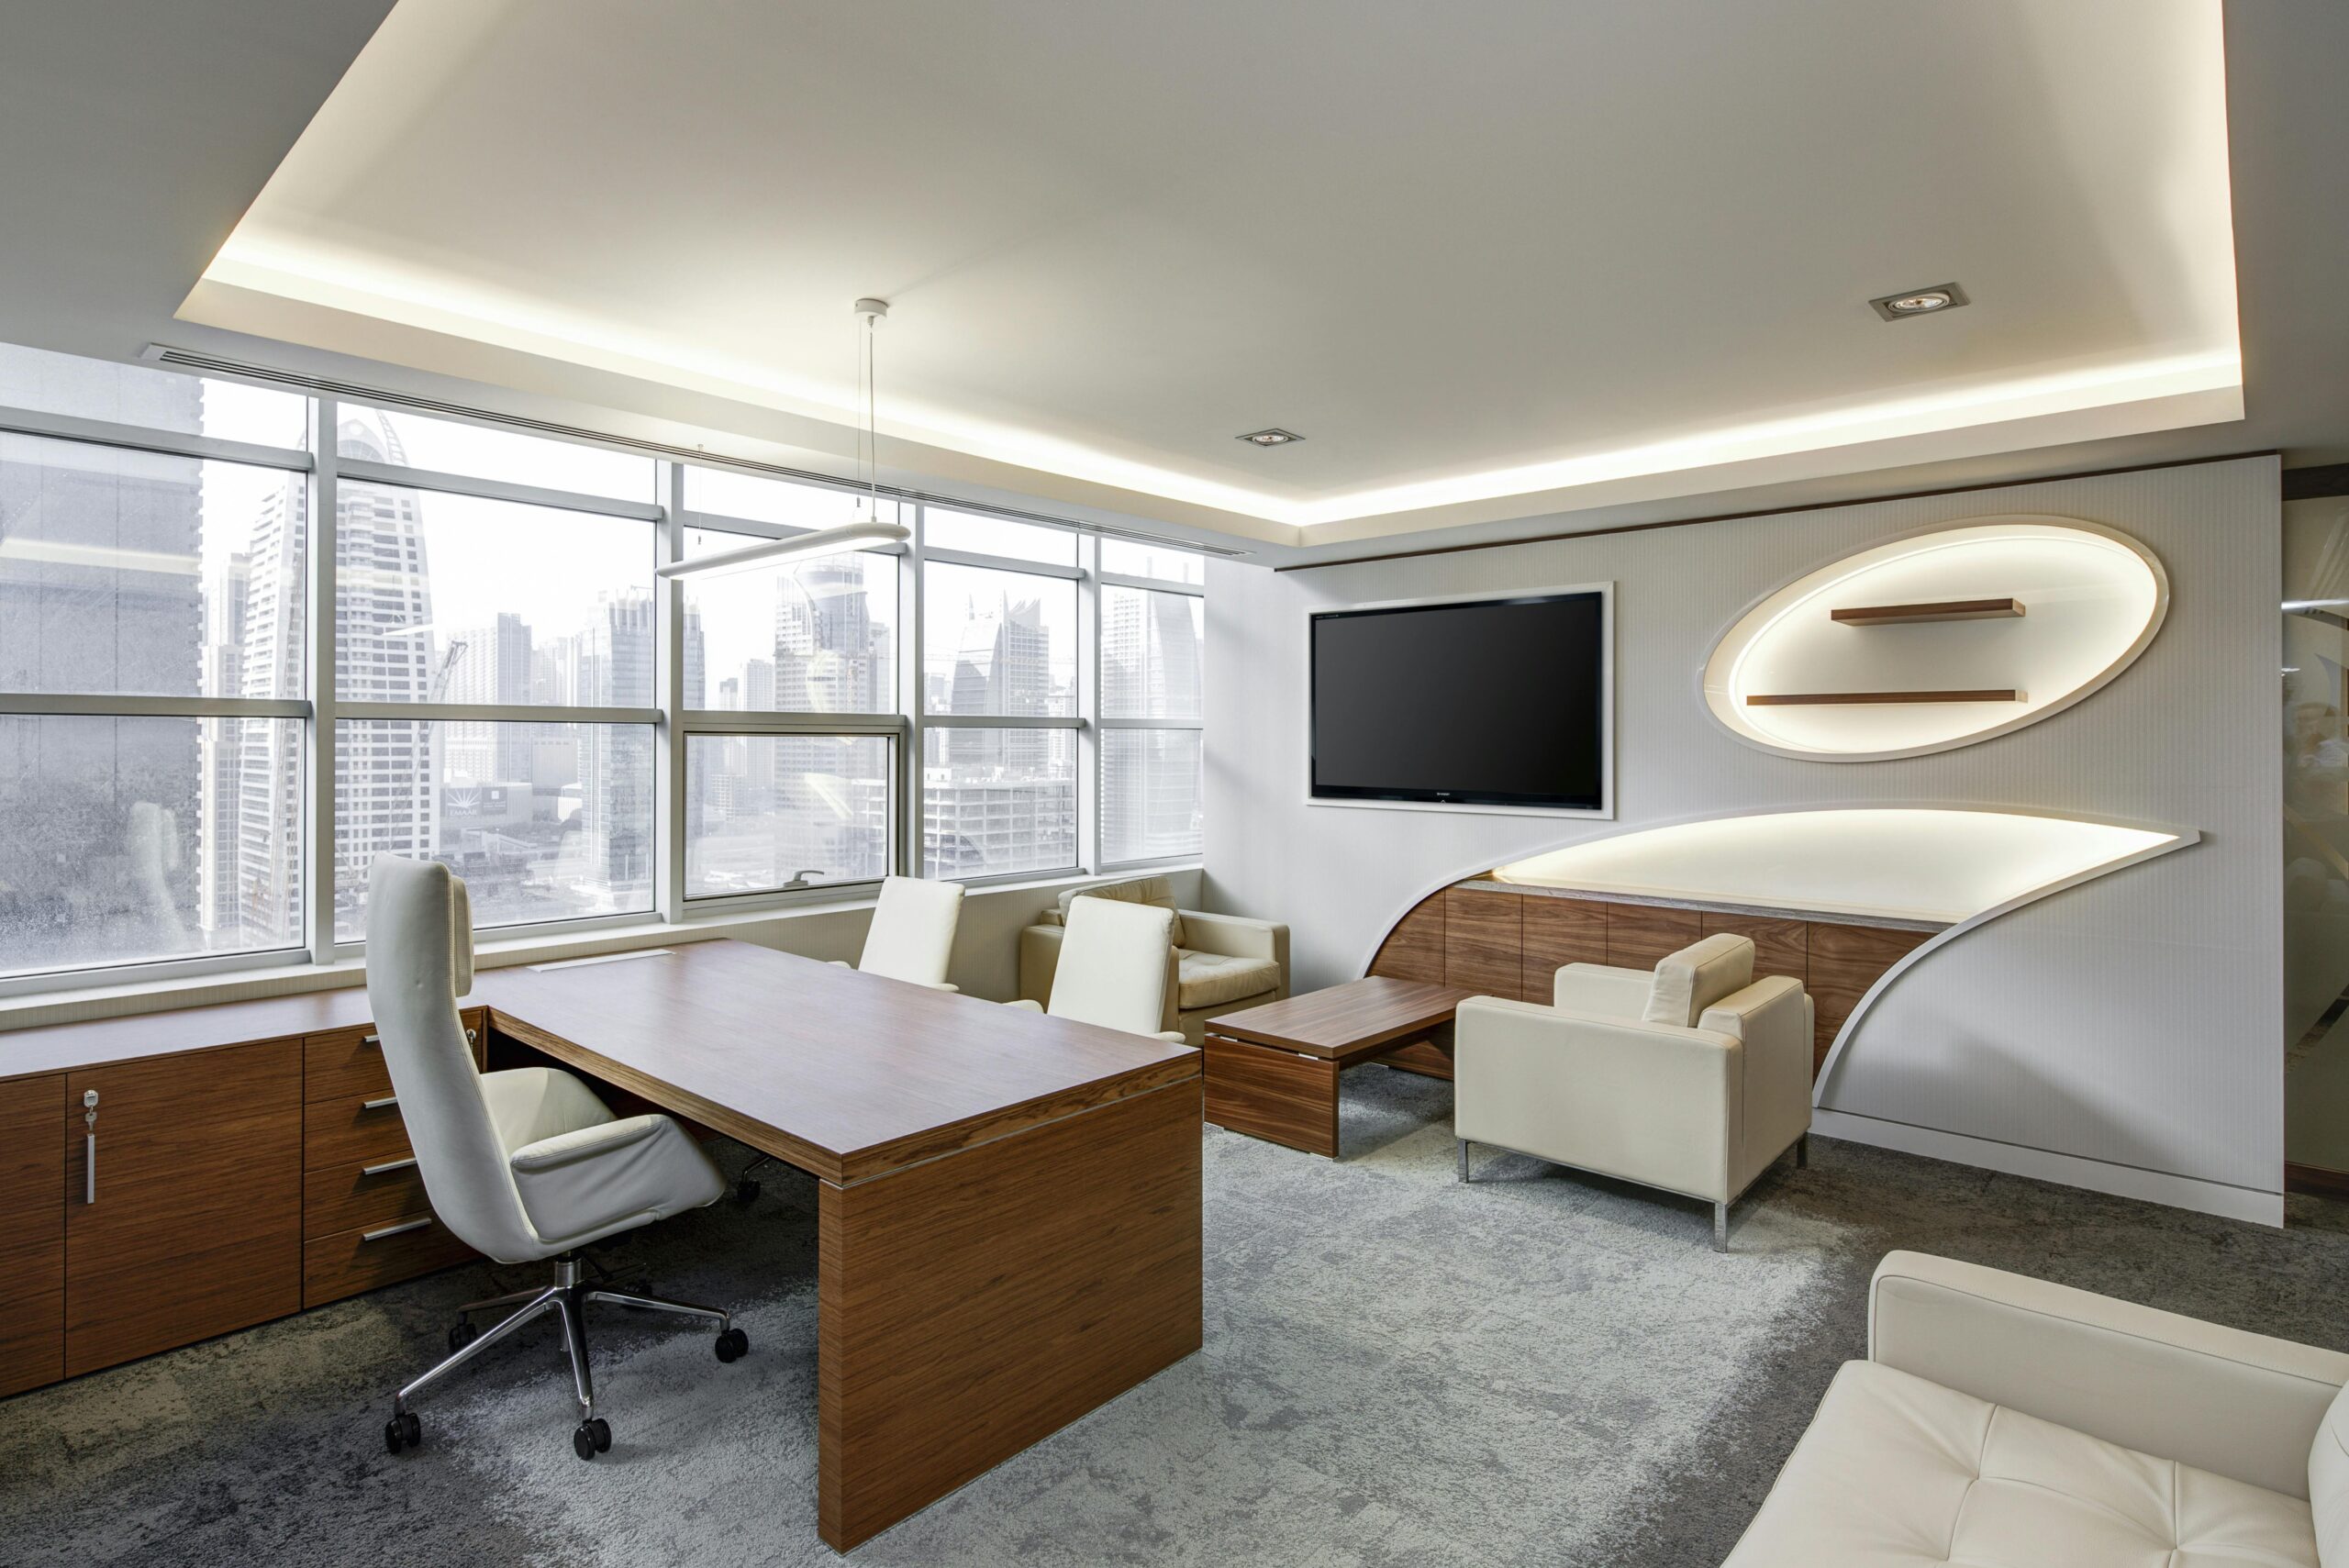 Tips To Help You Plan The Design Layout Of Your New Office Space